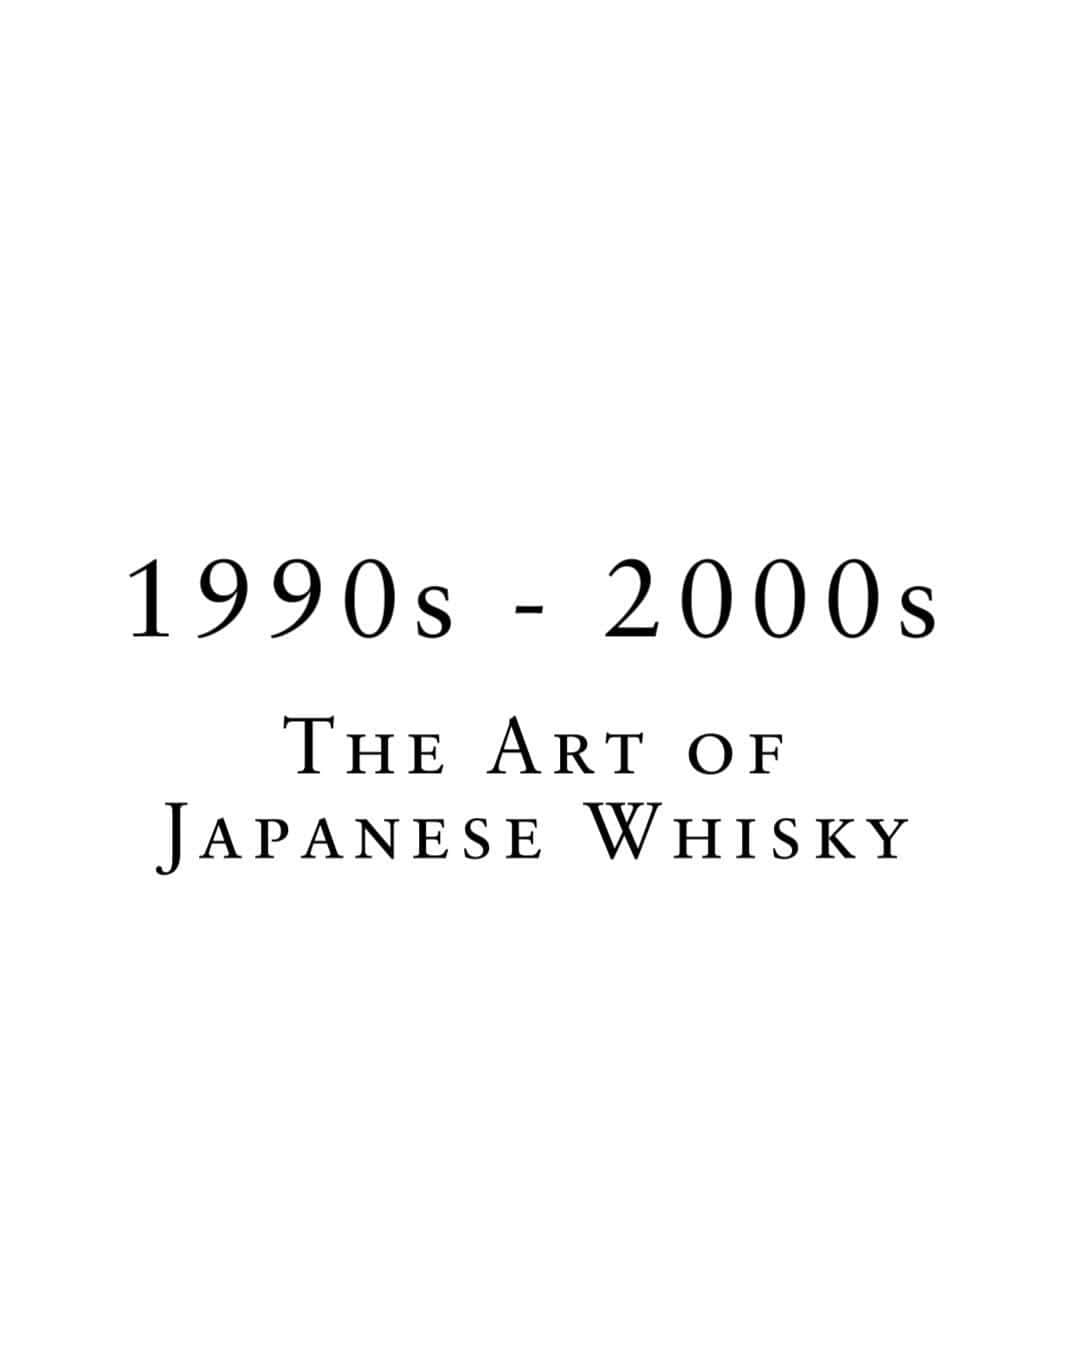 Suntory Whiskyのインスタグラム：「With the launch of the House’s first Japanese Single Malt whiskies - Yamazaki and Hakushu, as well as a new pinnacle blend, Hibiki, Keizo Saji took on the challenge that would definitively shape the future of Suntory Whisky. ⁣ ⁣ It was Shingo Torii, however, the founder’s grandson and the Third-Generation Master Blender, who carried the Suntory name to the global stage. His undeterred commitment to quality and an uncompromising attitude - be it pushing the boundaries of Japanese craftsmanship, or new product development - elevated the House to be synonymous with its award-winning reputation.⁣ ⁣ It is a vision that naturally and joyfully looks forward towards Suntory’s next 100 years of pioneering. Let’s raise a glass to Suntory Time!⁣ ⁣ #Suntory100 #SuntoryWhisky #SuntoryTime」